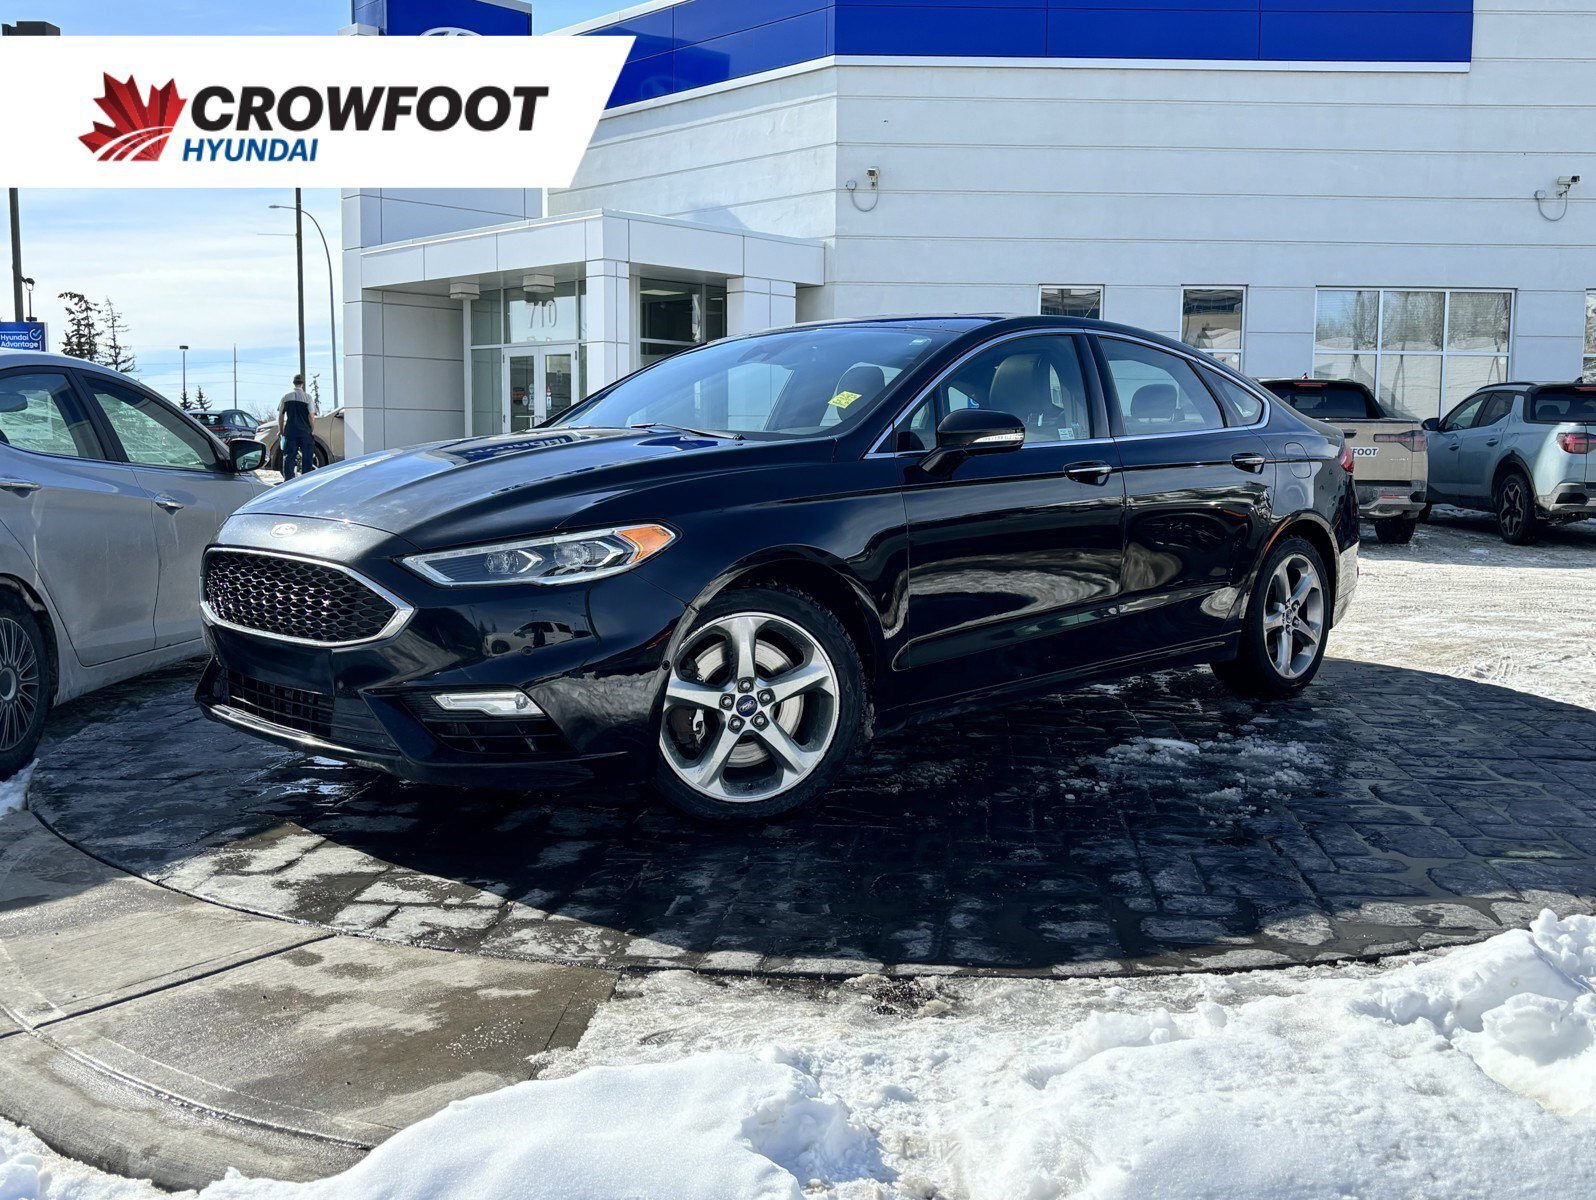 2017 Ford Fusion V6 Sport - AWD, One Owner, No Accidents, Sunroof